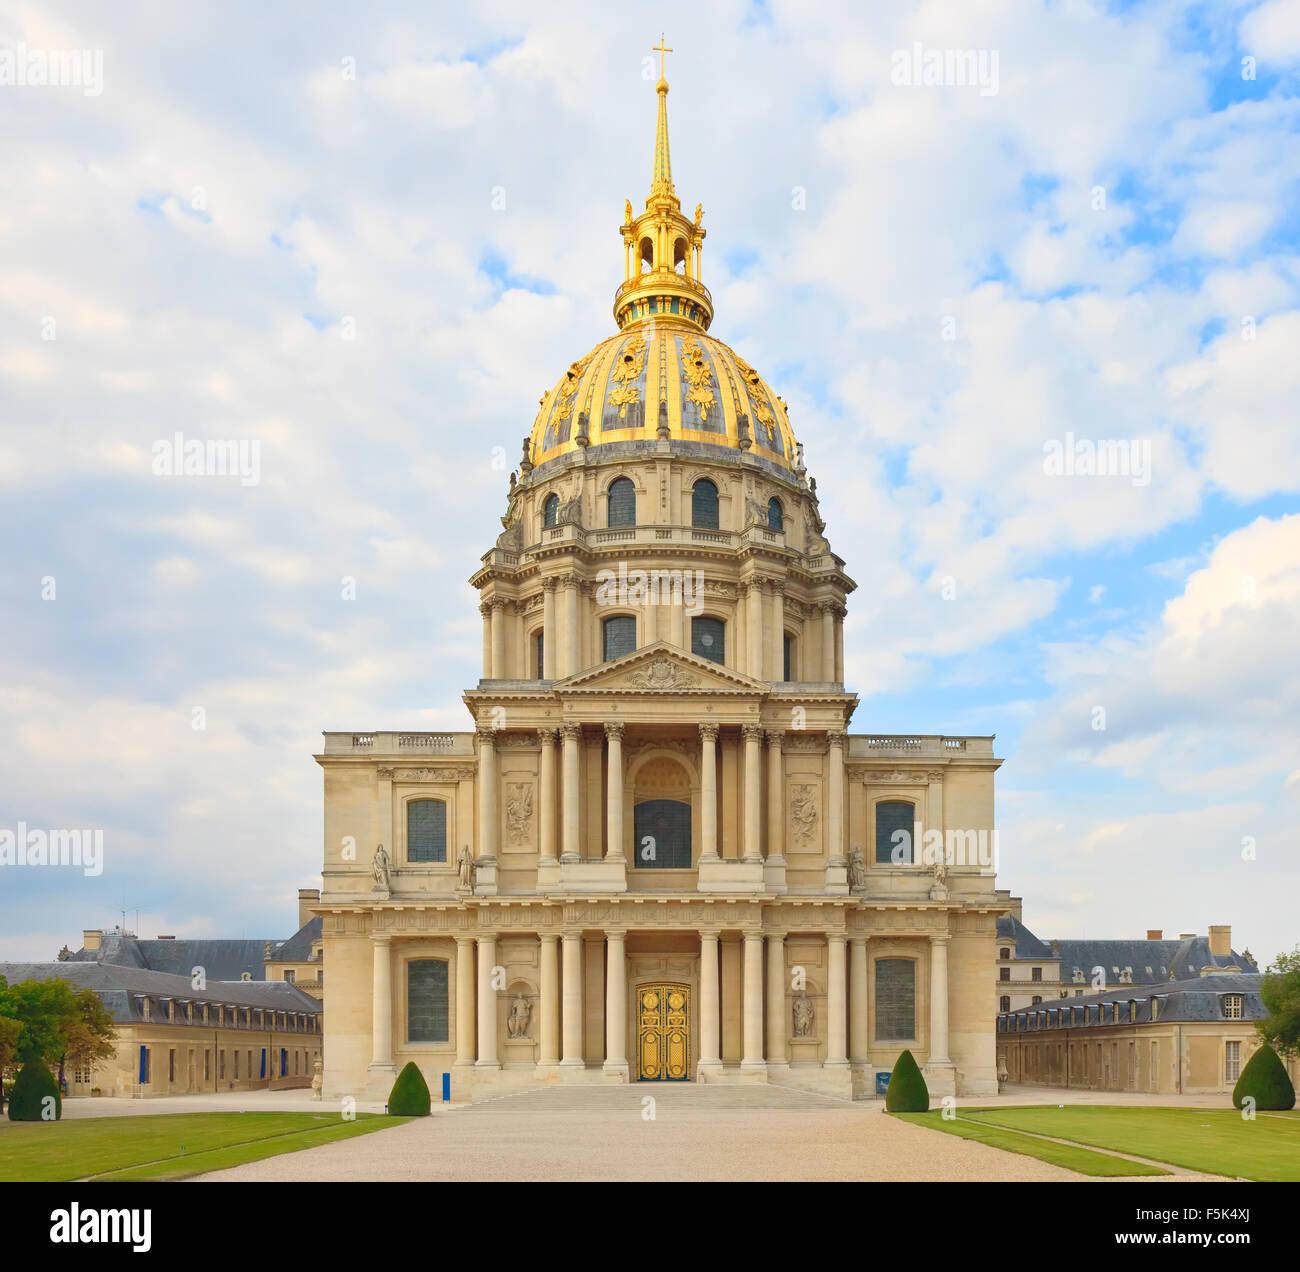 Les Invalides, Paris, France, Europe. This french landmark is famous for Napoleon Bonaparte burial place. In this image detail o Stock Photo